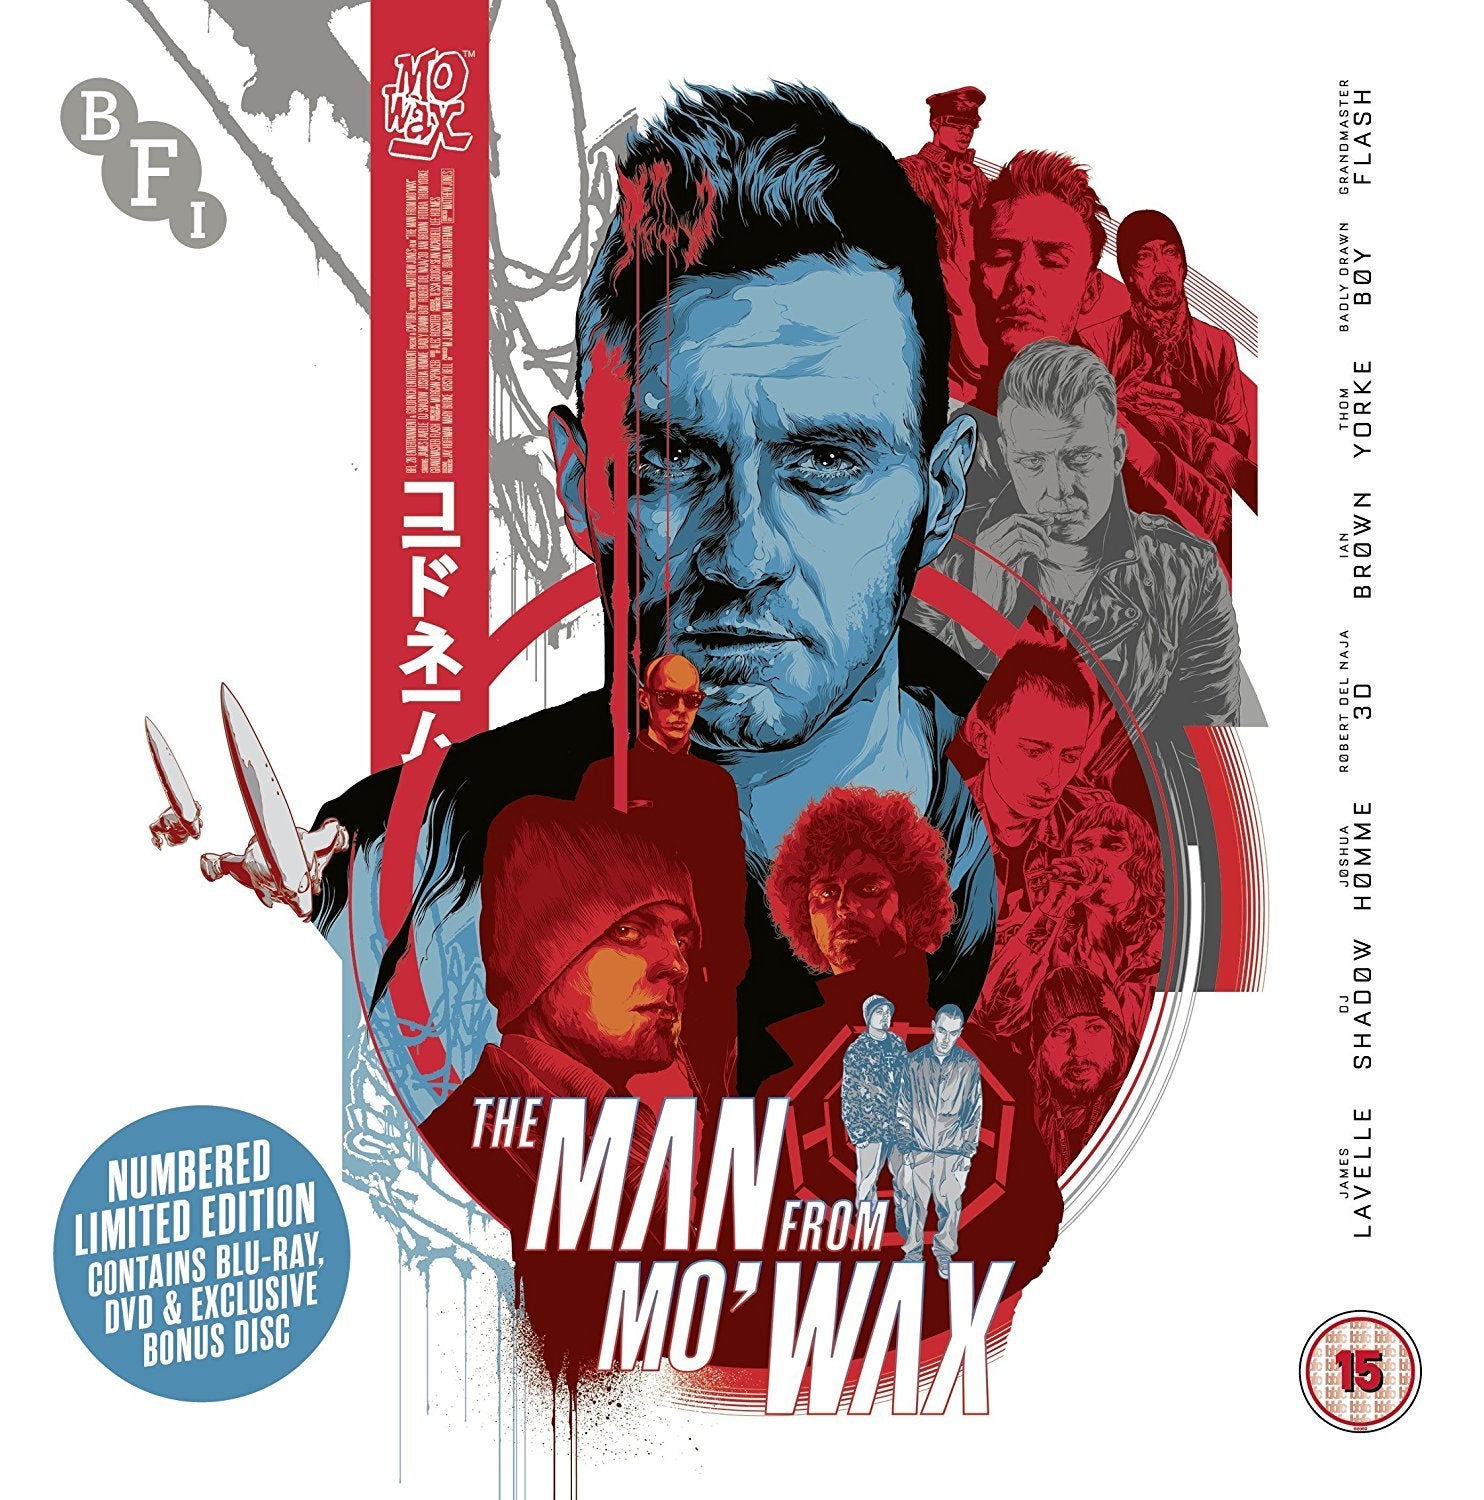 THE MAN FROM MO'WAX (REGION B IMPORT - LIMITED EDITION) BLU-RAY/DVD